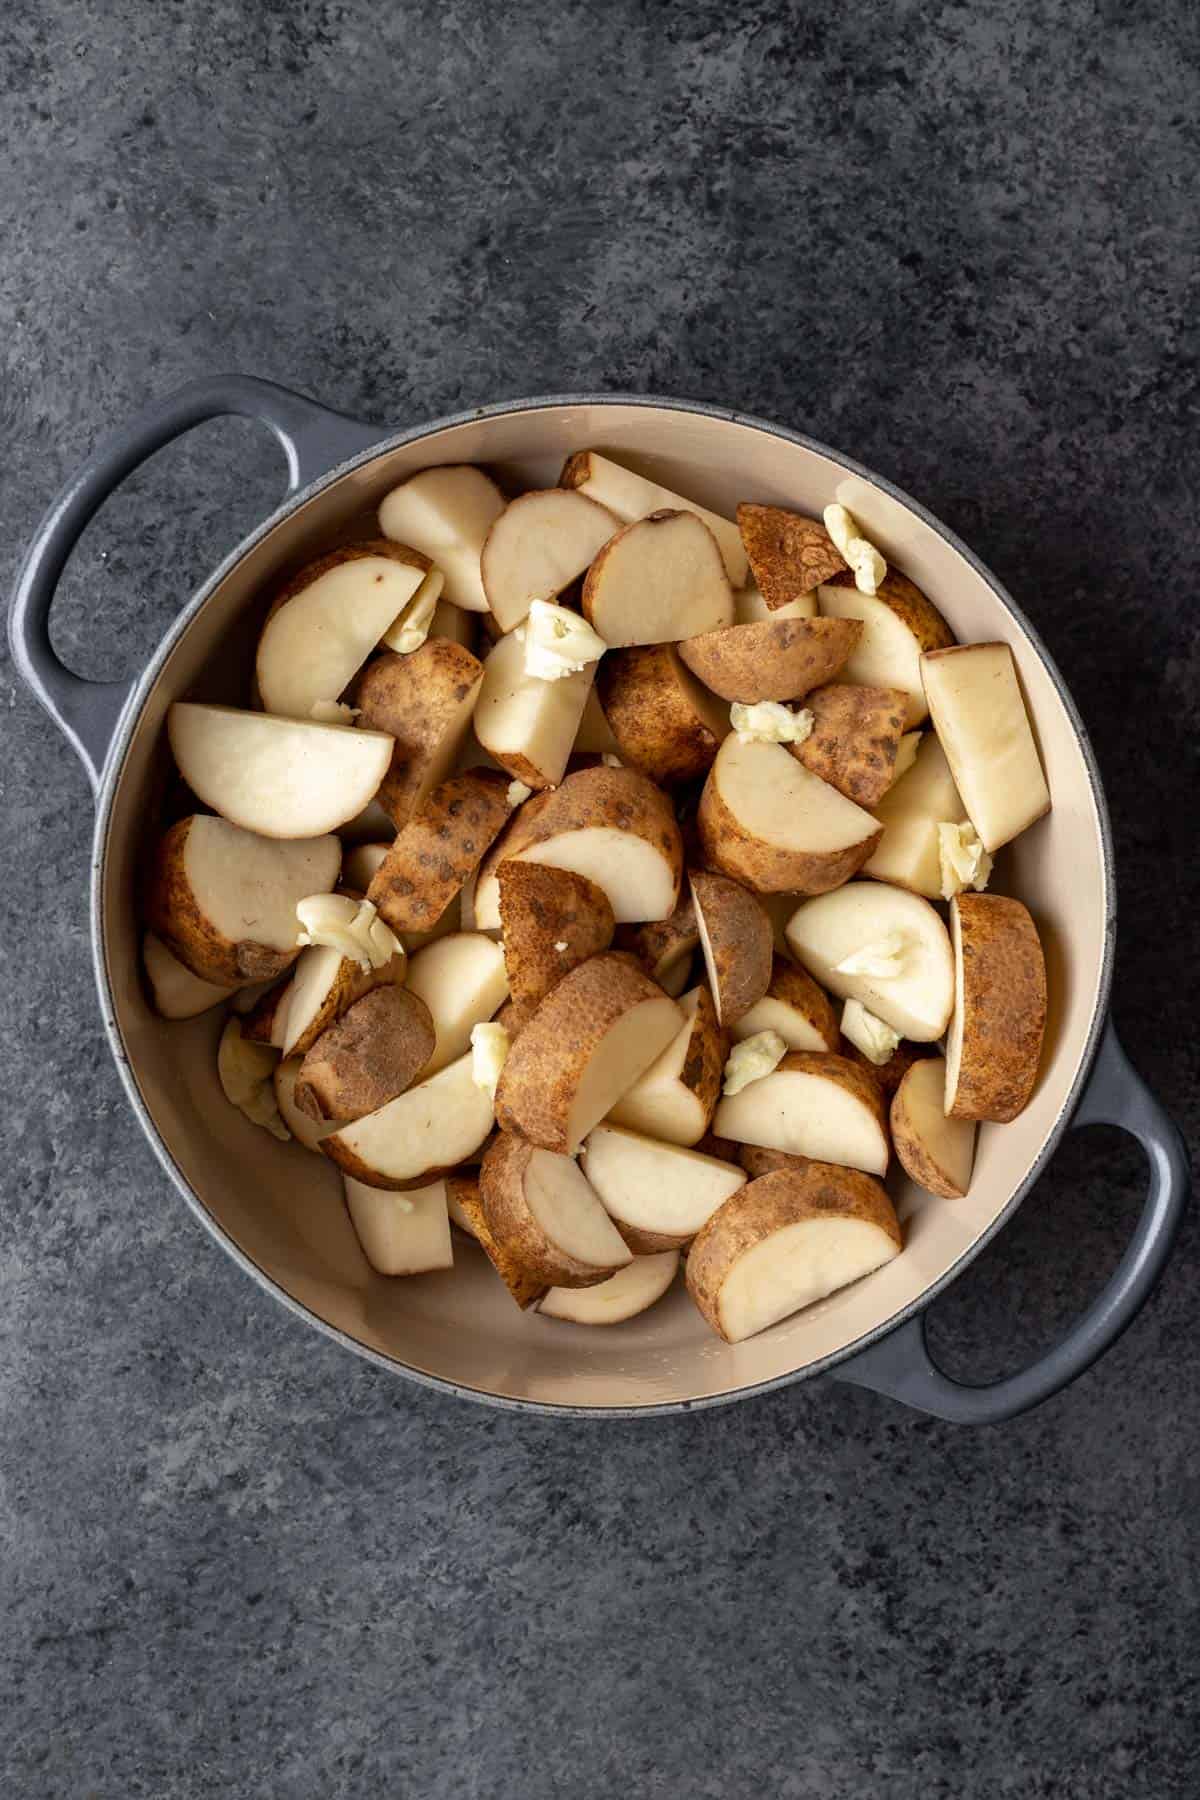 Chopped potatoes in a large pot with smashed cloves of garlic.